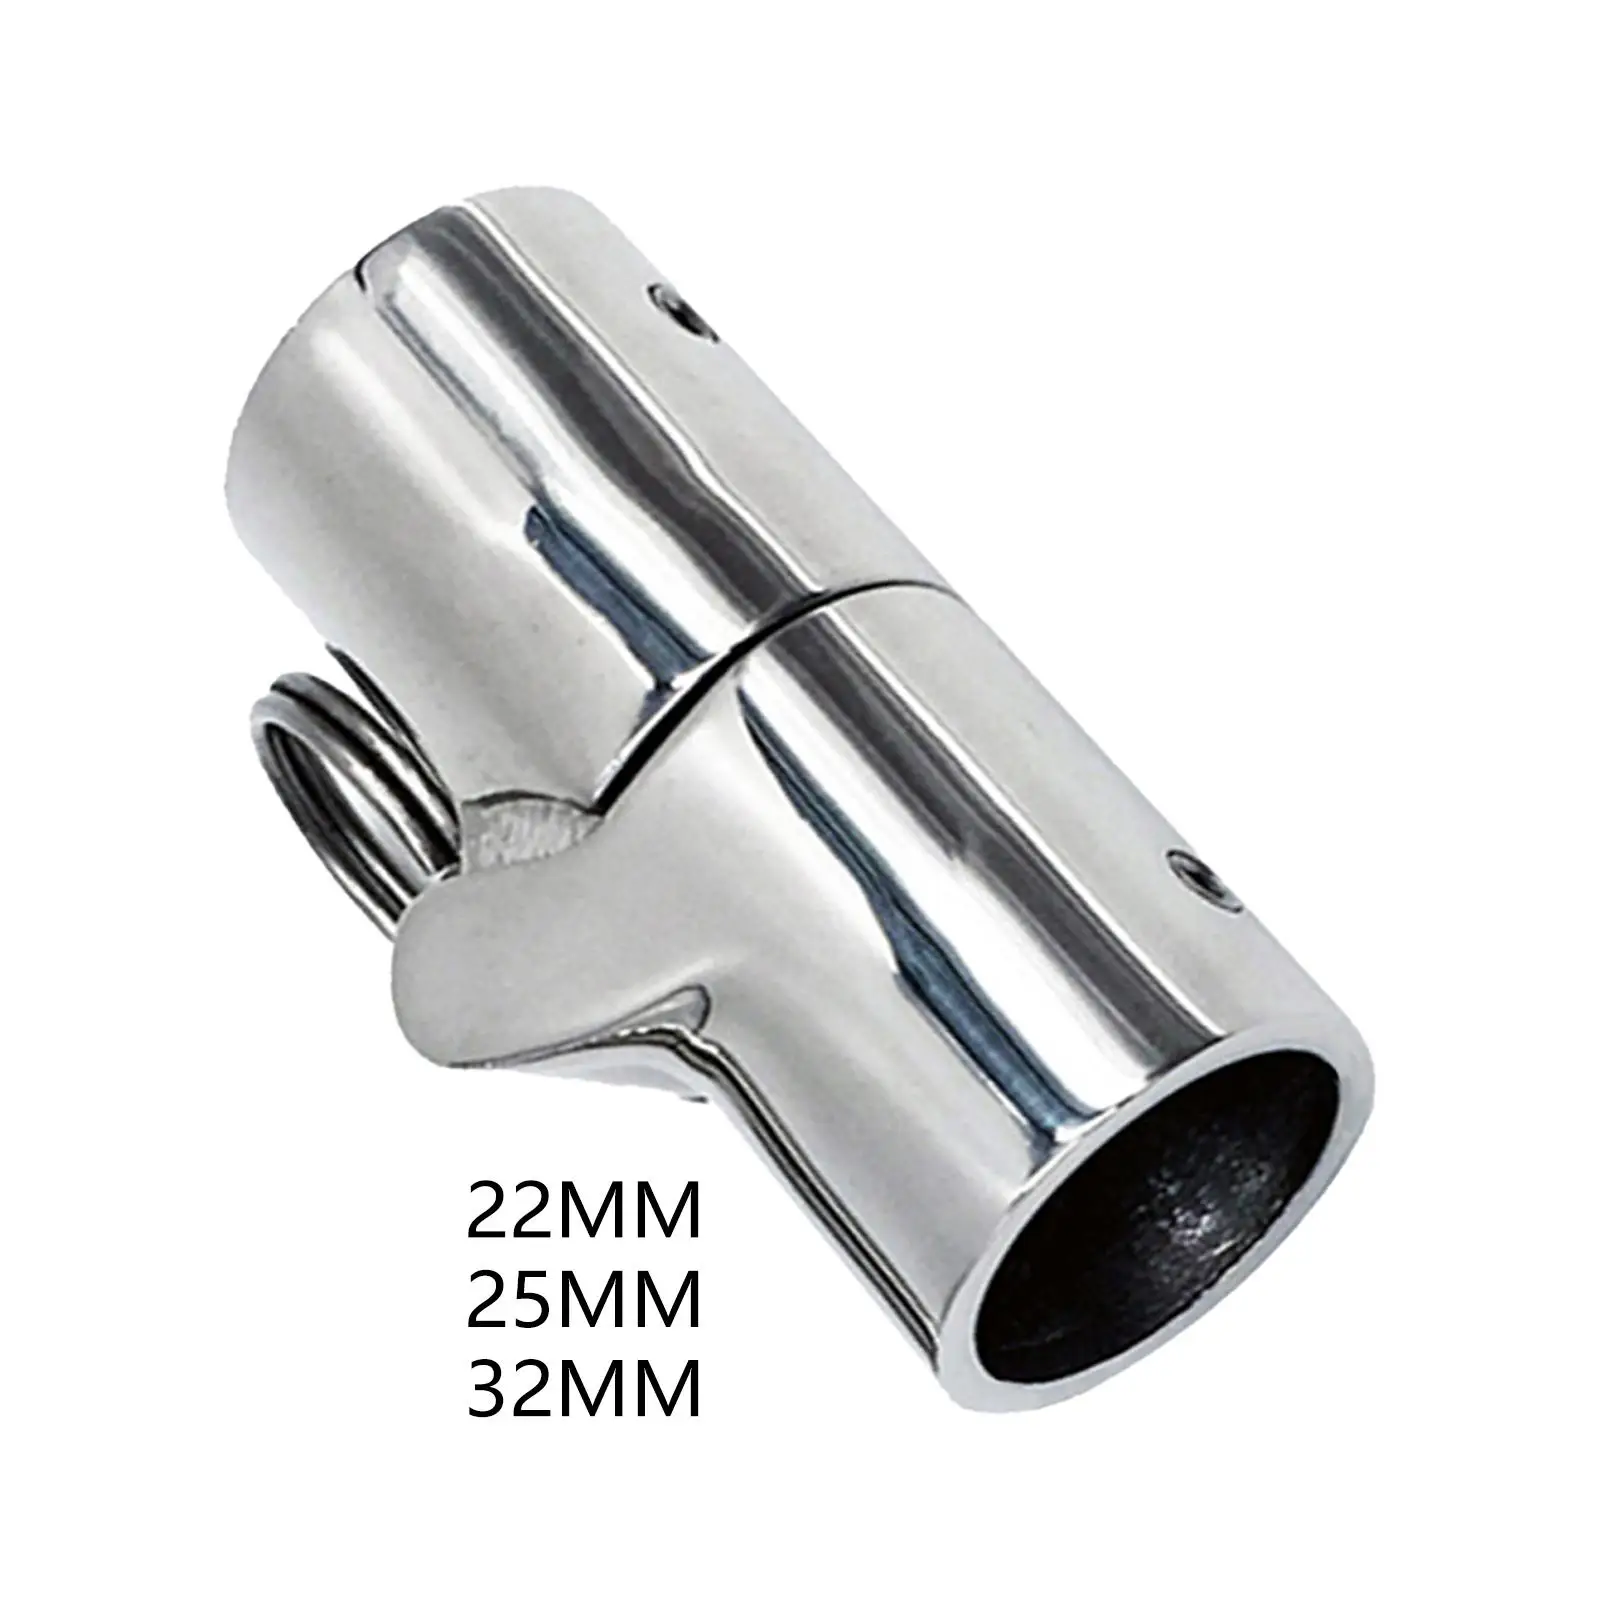 Boat Railing Pipe Connector Boat Hardware Marine Stainless Steel Boat Hand Rail Tube Swivel Coupling Tube for Marine Yacht Boat